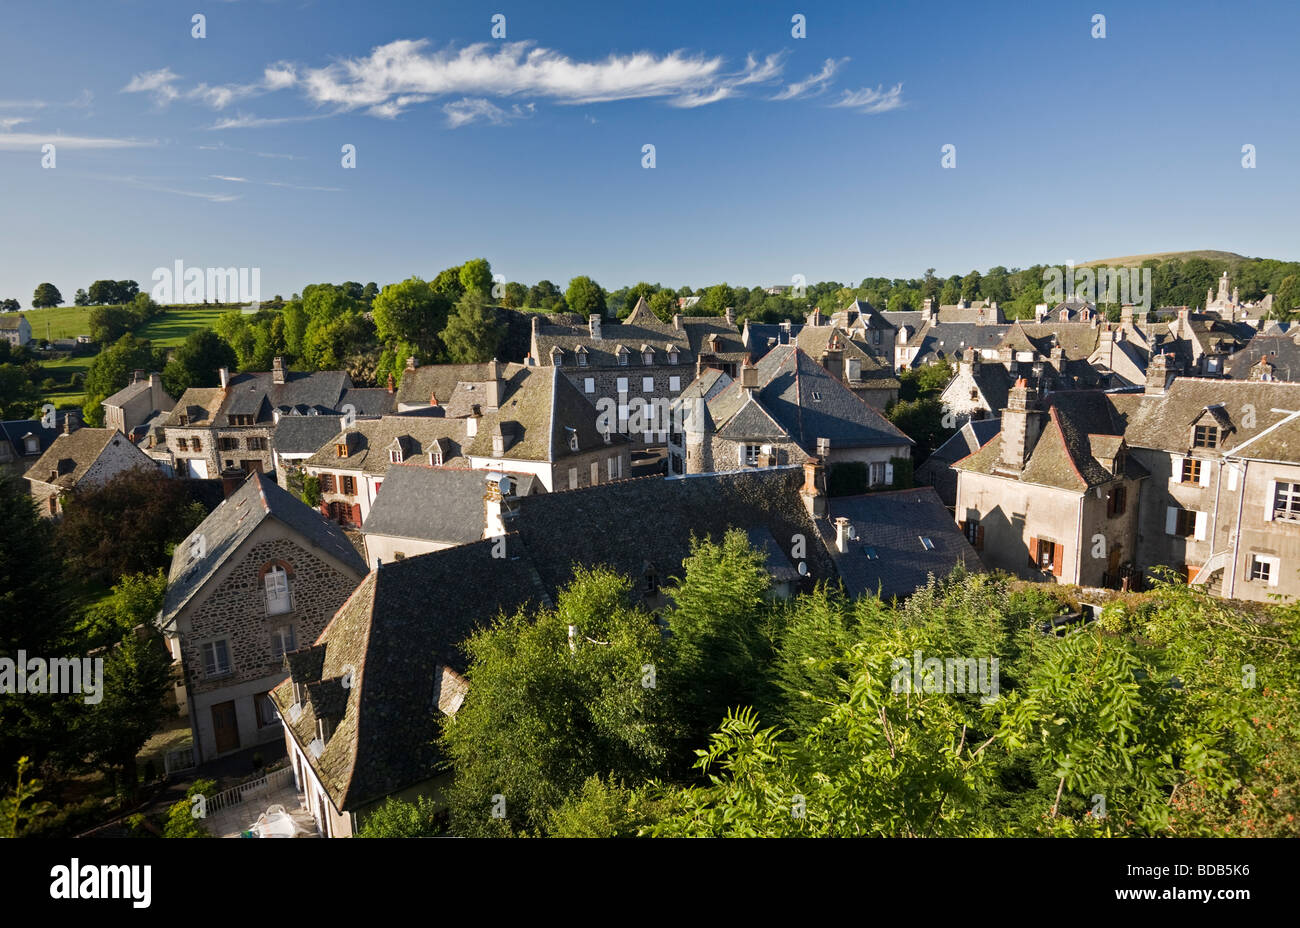 The village of Salers (Cantal), presented as one of the most beautiful villages of France. Le village de Salers (France). Stock Photo